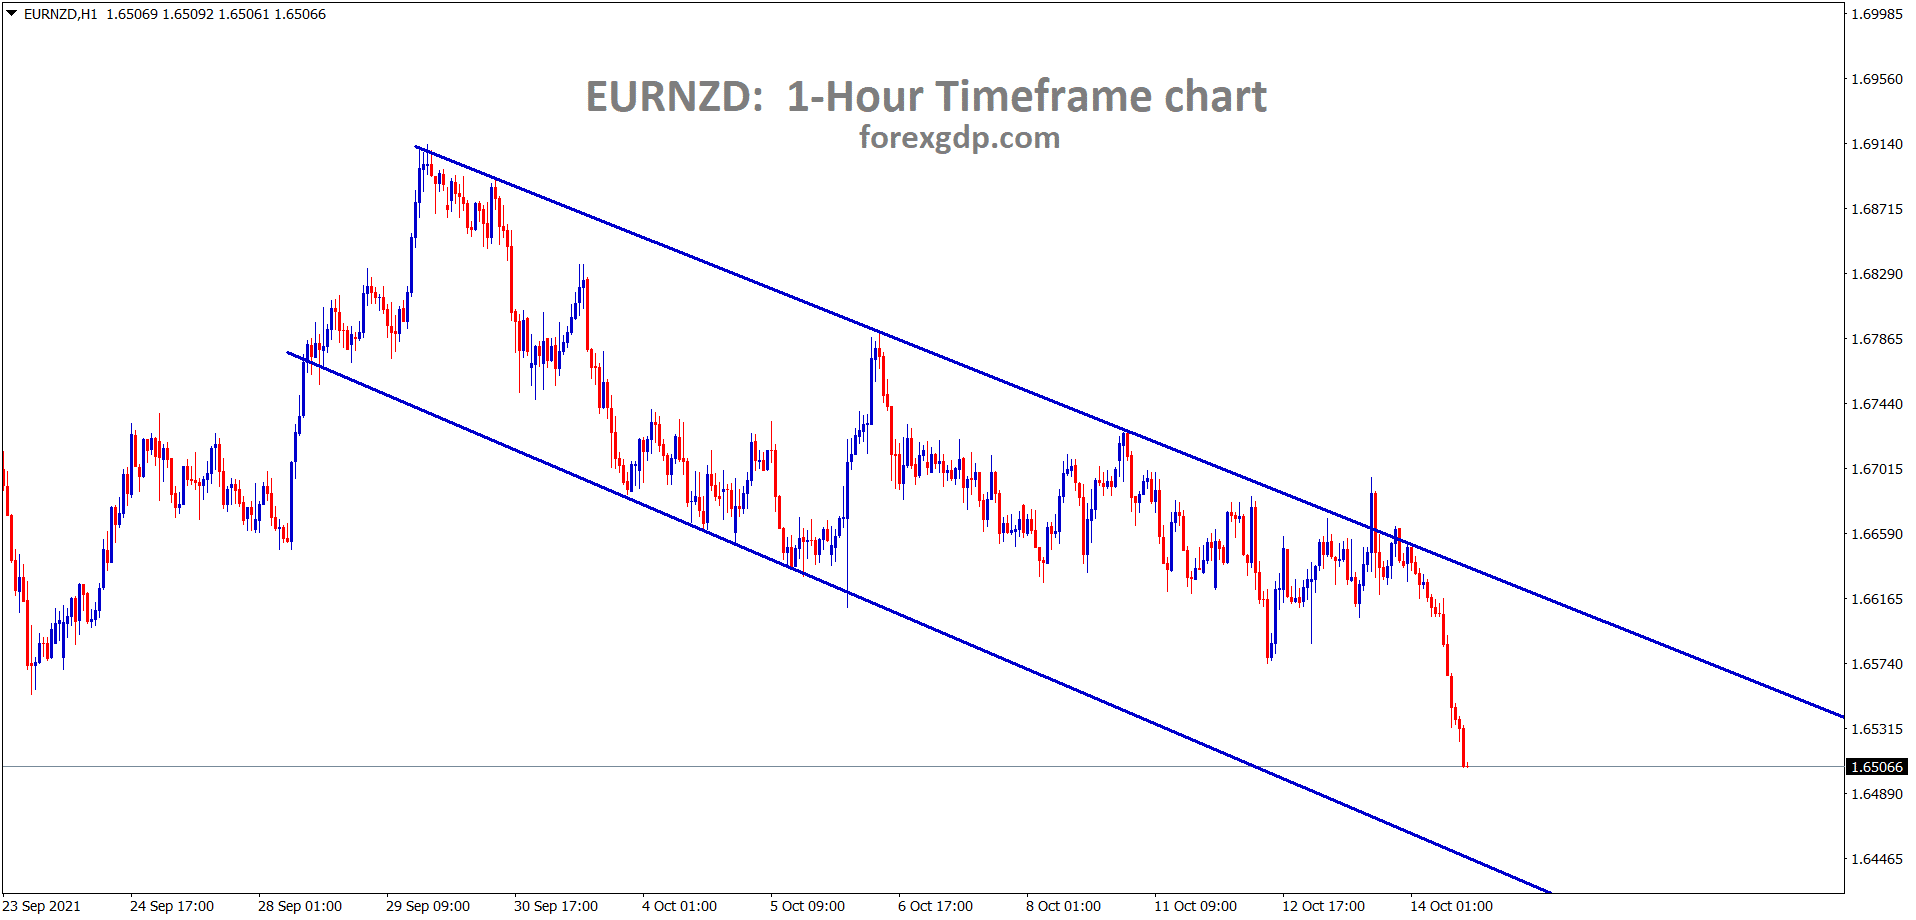 EURNZD is moving in a downtrend creating further lower lows